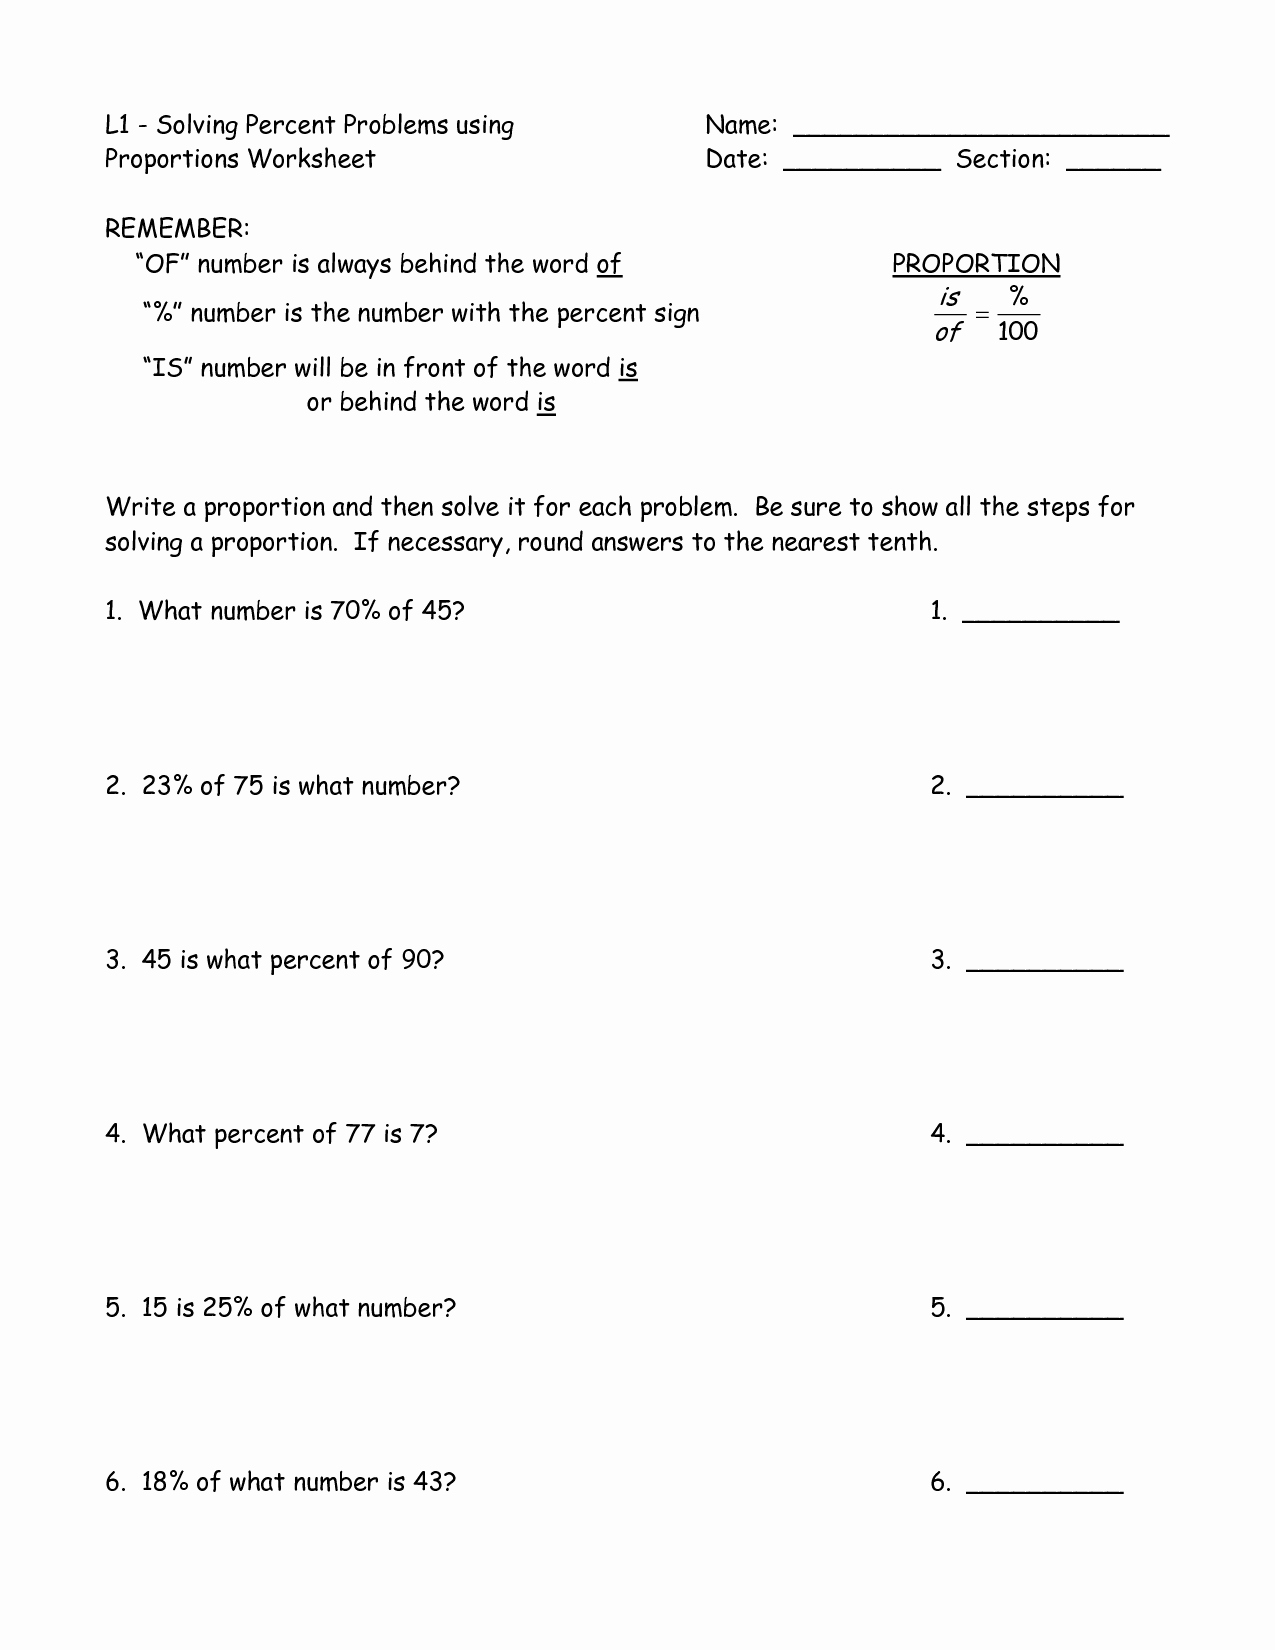 Proportions Worksheet 6th Grade Awesome 10 Best Of Percent Proportion Worksheets 6th